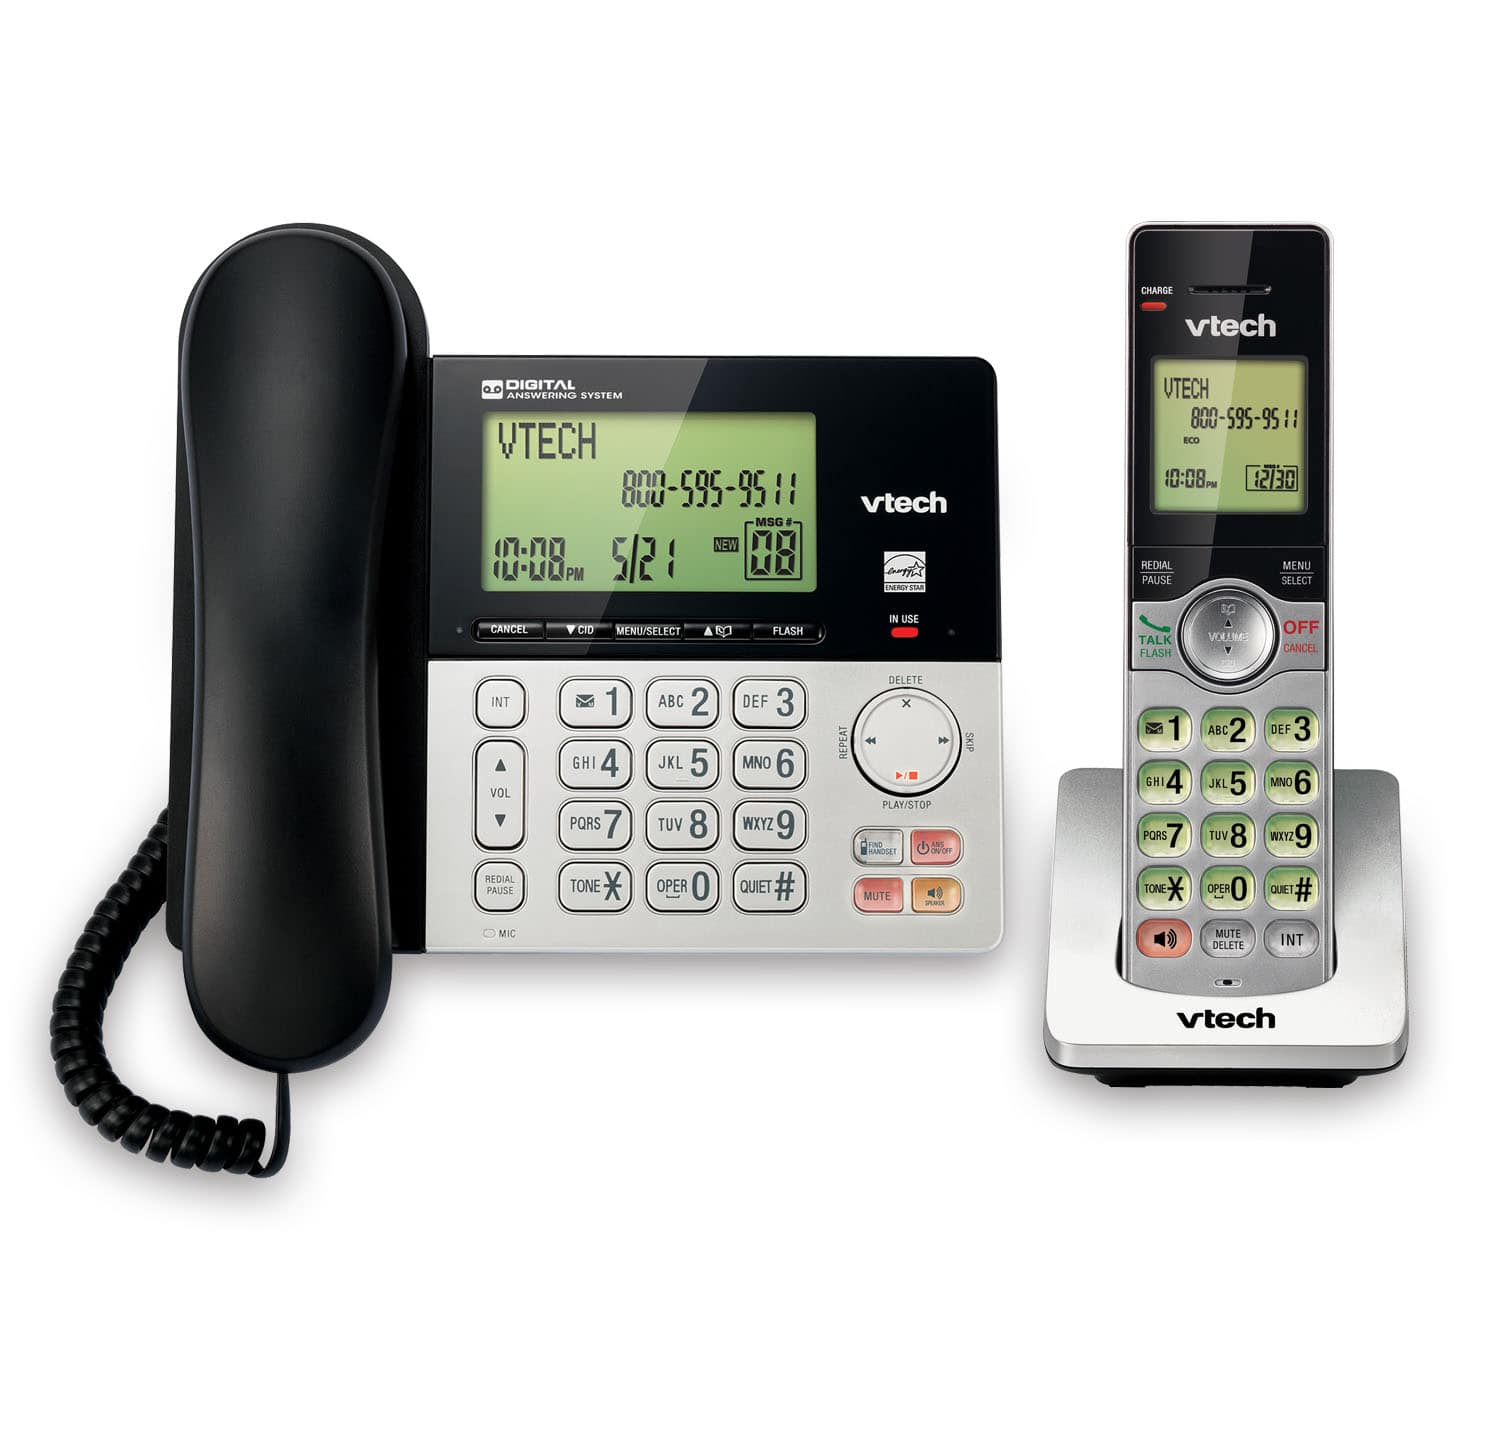 CS5129-3 3 Handset Black Vtech Cordless Phone with Answering // Caller ID